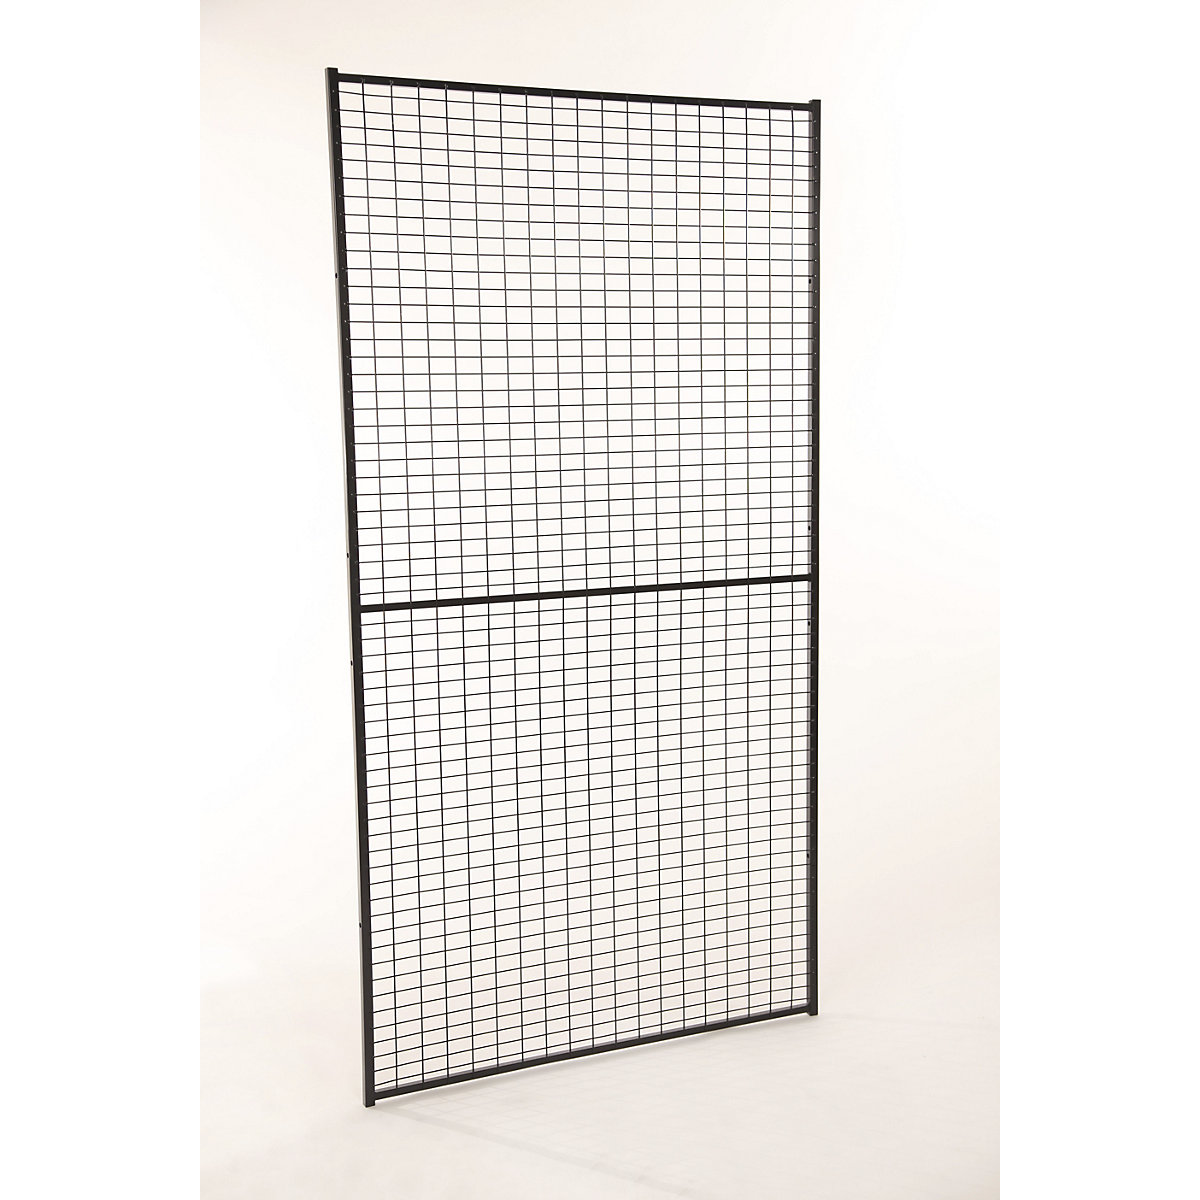 X-GUARD LITE machine protective fencing, wall section – Axelent, height 2200 mm, width 600 mm-6